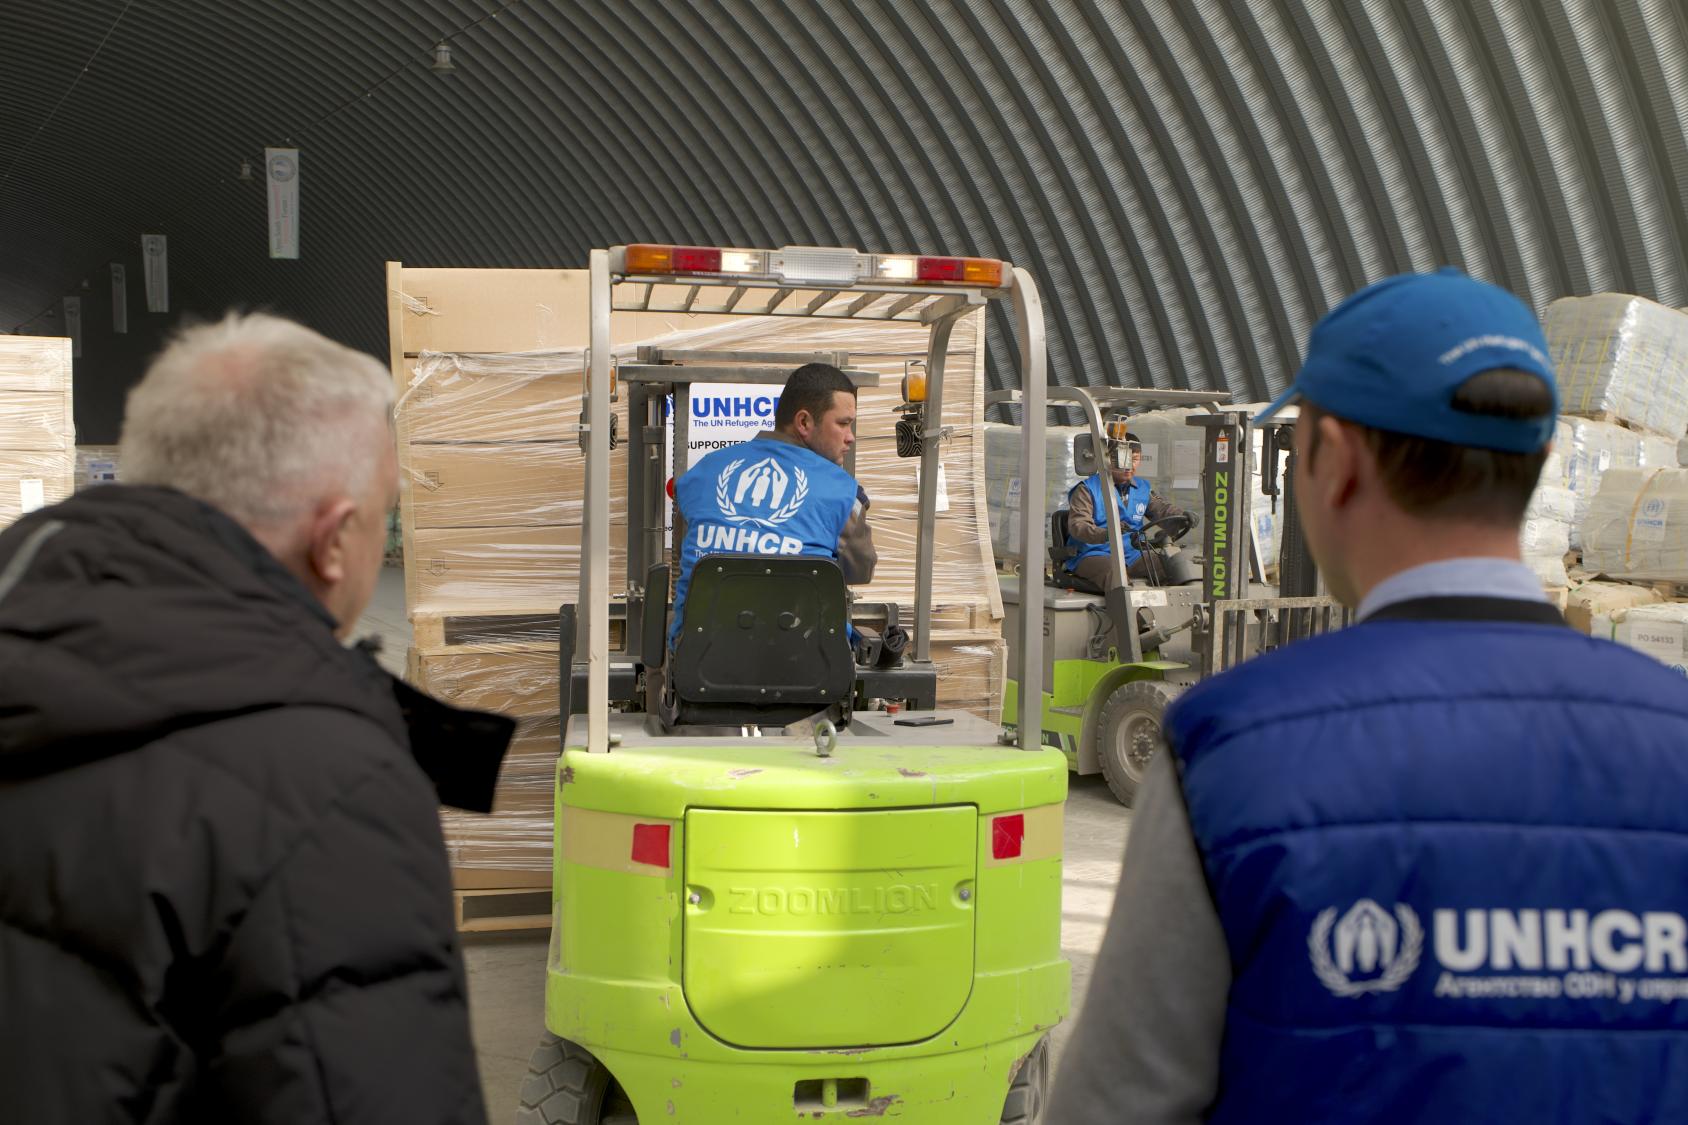 Logistics officers from UNHCR Central Asia move pallets of aid at the Termez Regional Humanitarian Logistics Hub in Termez, Uzbekistan 